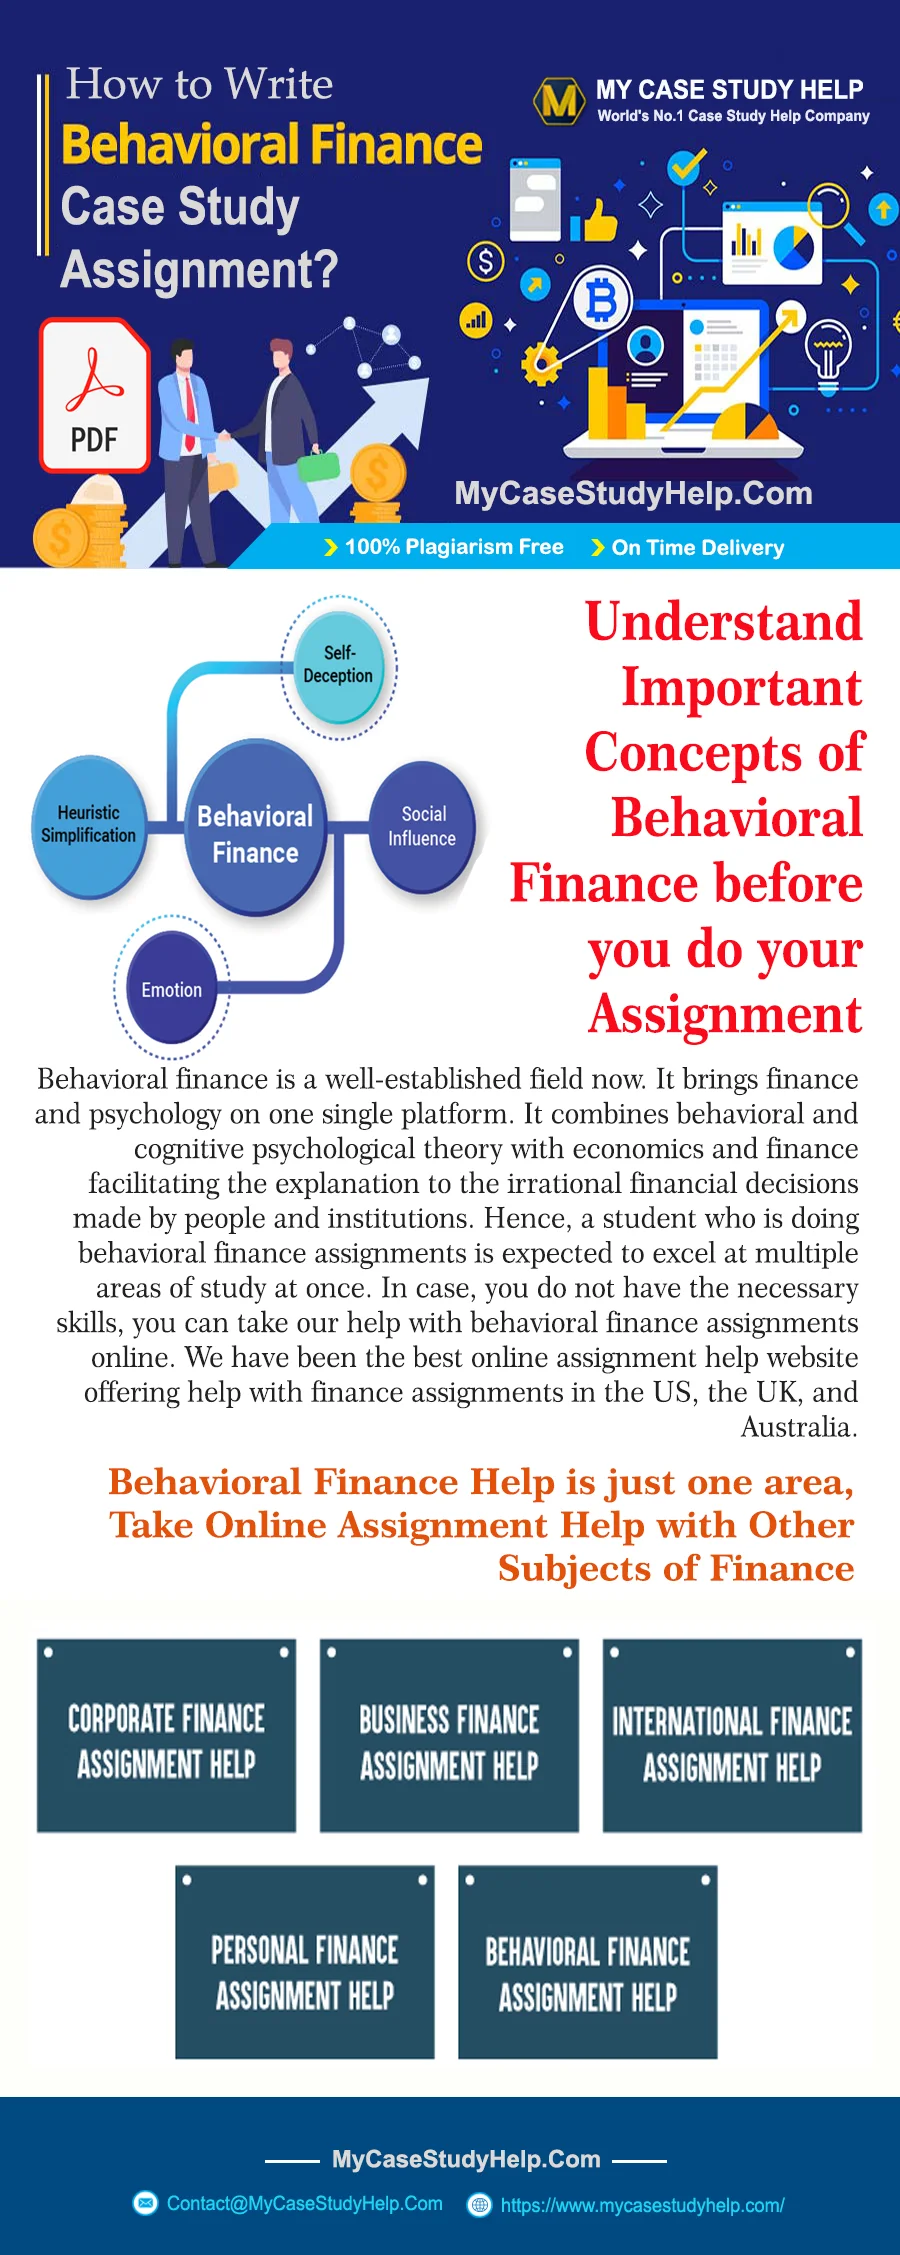 How To Write Behavioural Finance Case Study Assignment?